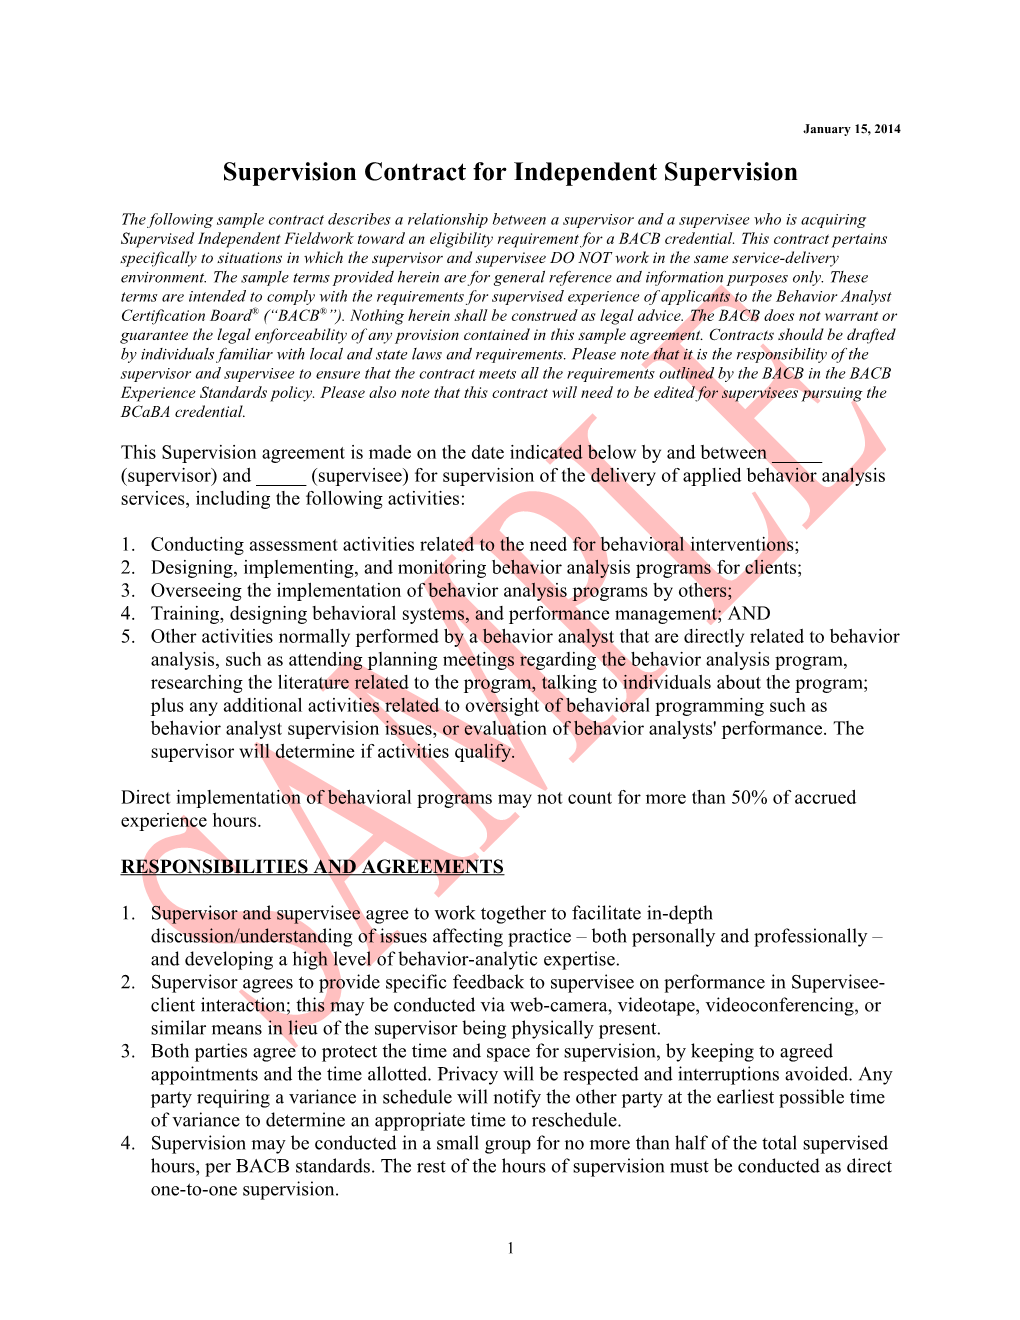 Supervision Contract for Independent Supervision